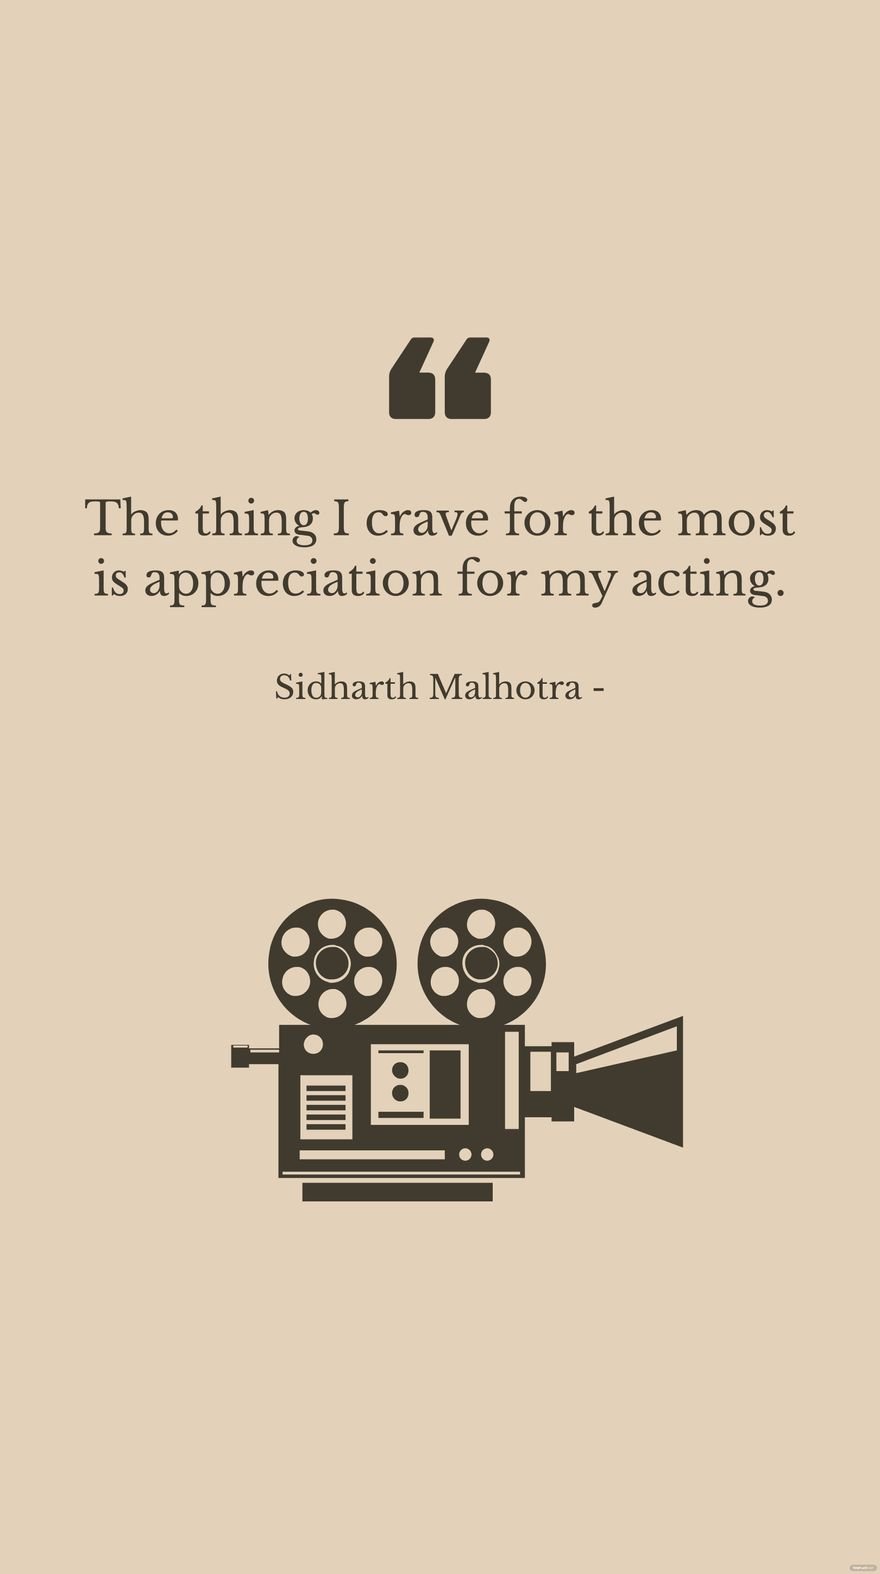 Free Sidharth Malhotra - The thing I crave for the most is appreciation for my acting. in JPG